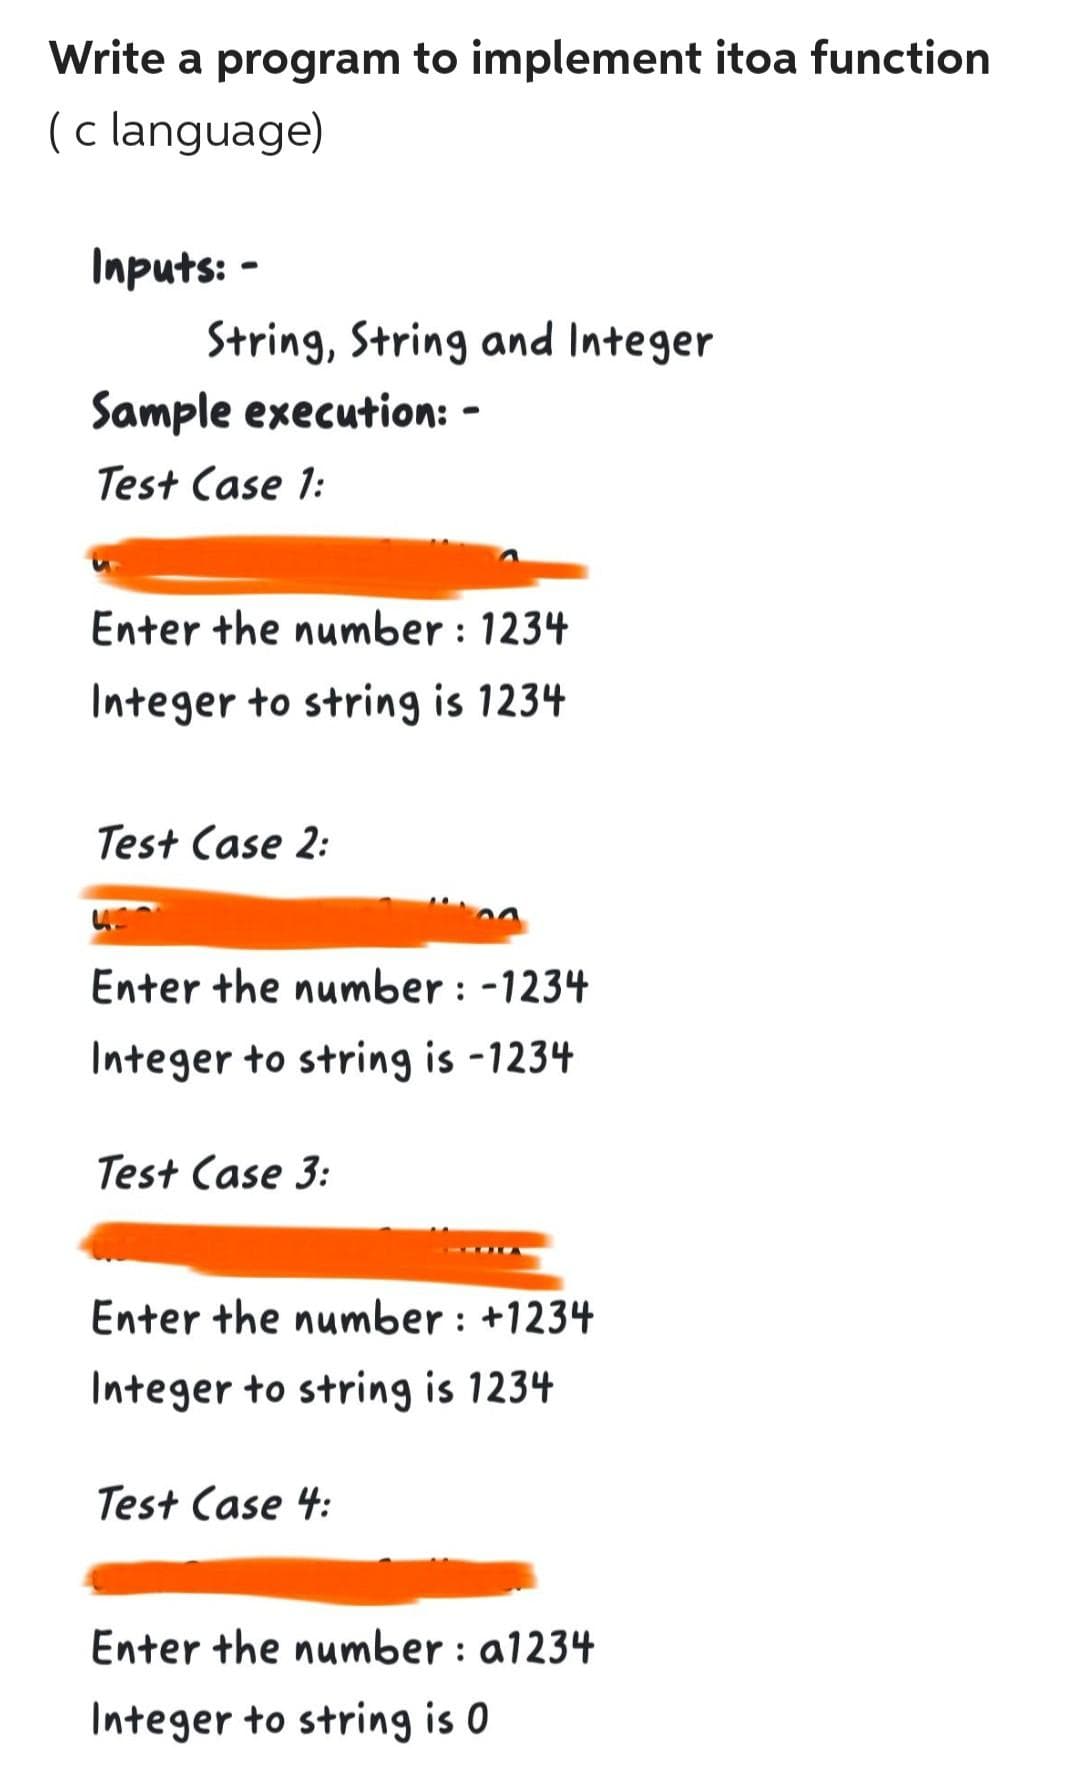 Write a program to implement itoa function
(c language)
Inputs: -
String, String and Integer
Sample execution: -
Test Case 1:
Enter the number: 1234
Integer to string is 1234
Test Case 2:
Enter the number: -1234
Integer to string is -1234
Test Case 3:
Enter the number: +1234
Integer to string is 1234
Test Case 4:
Enter the number : a1234
Integer to string is 0